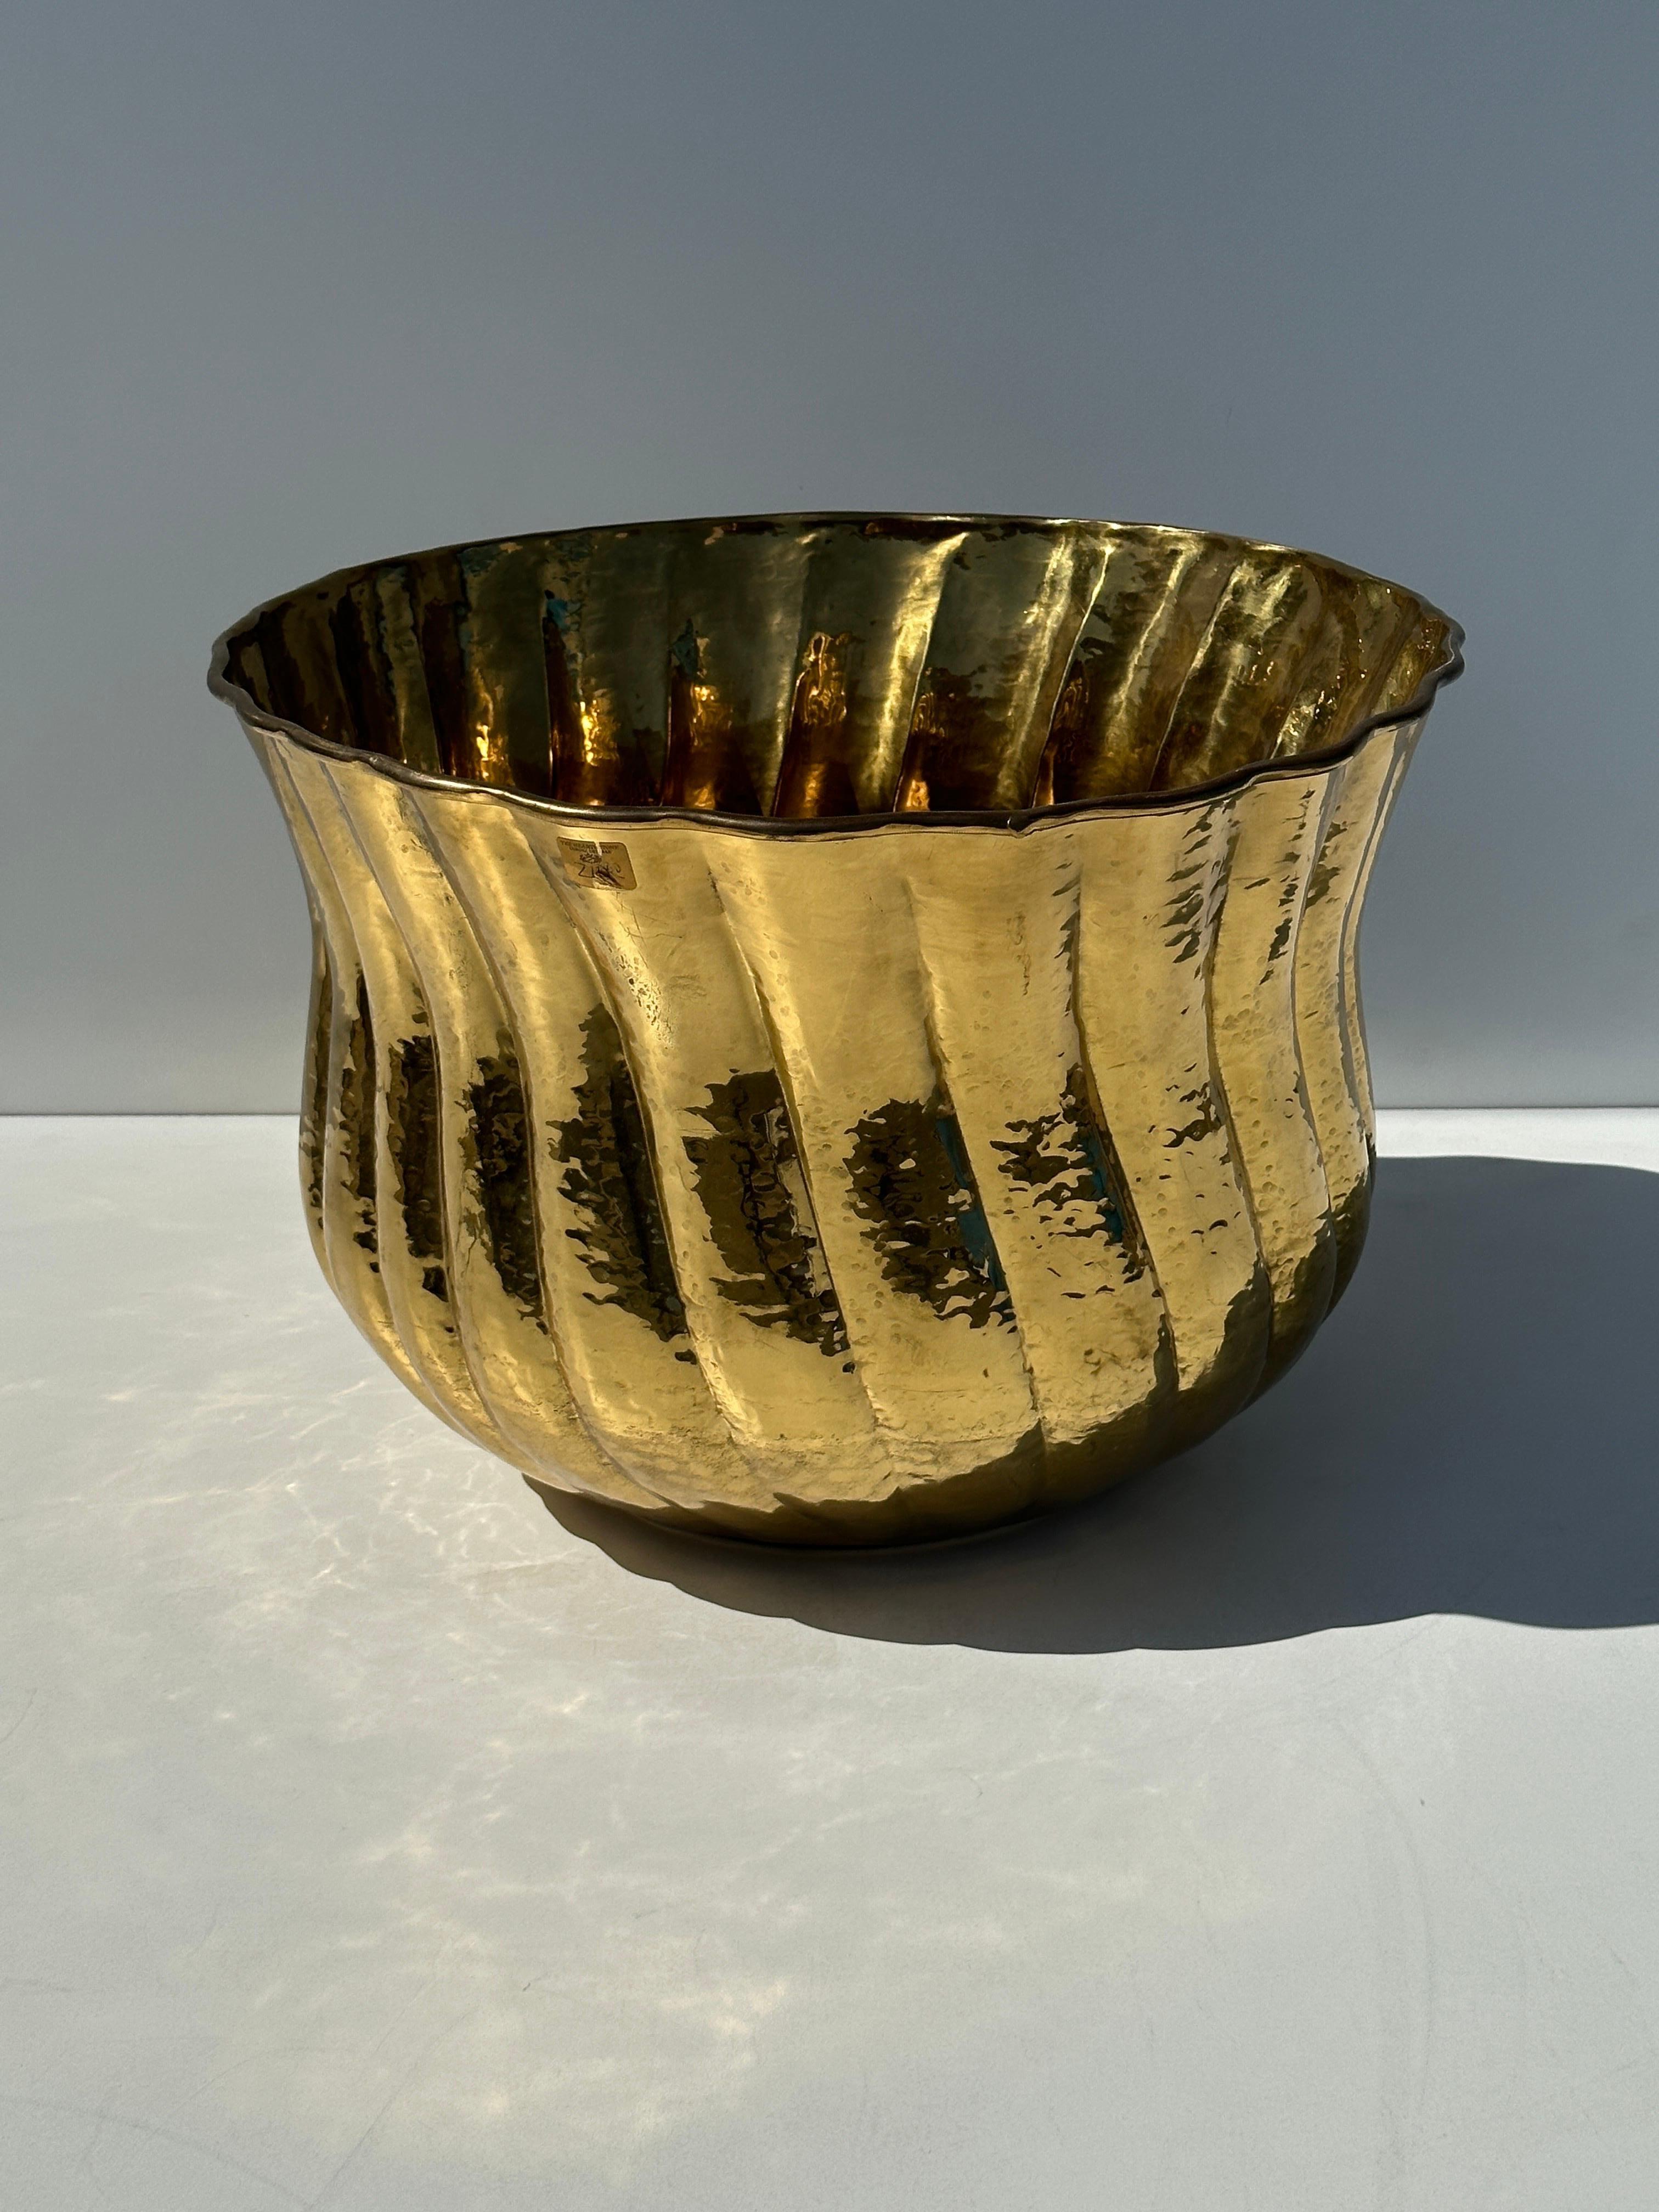 Extra large hand hammered brass planter.
We also have matching large and medium sizes available shown in last photo.